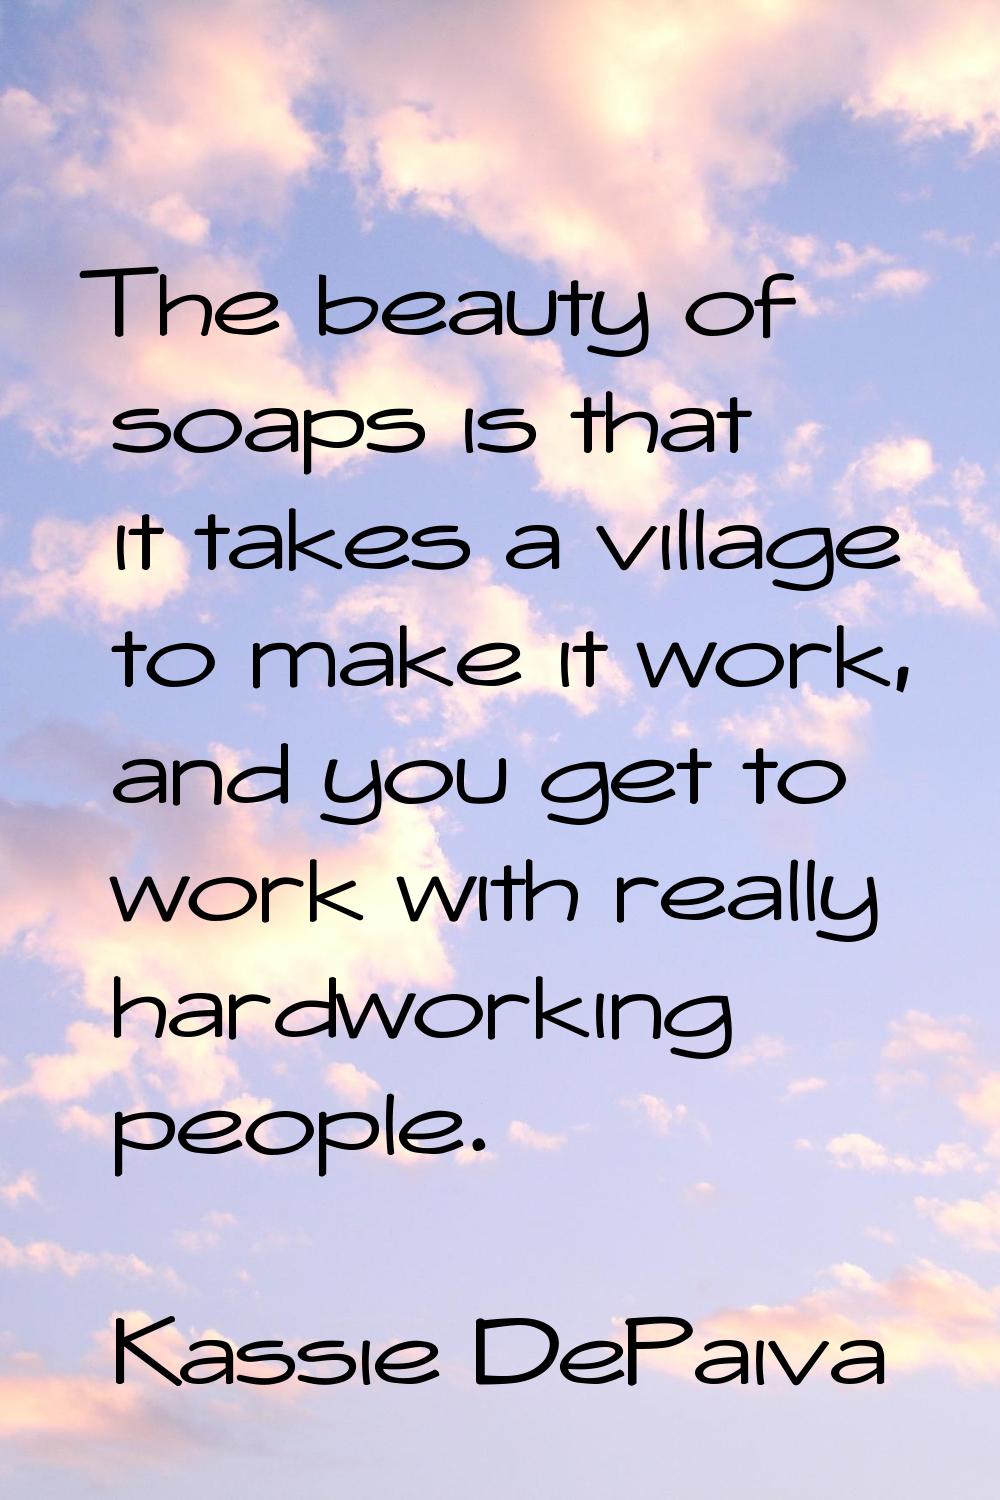 The beauty of soaps is that it takes a village to make it work, and you get to work with really har